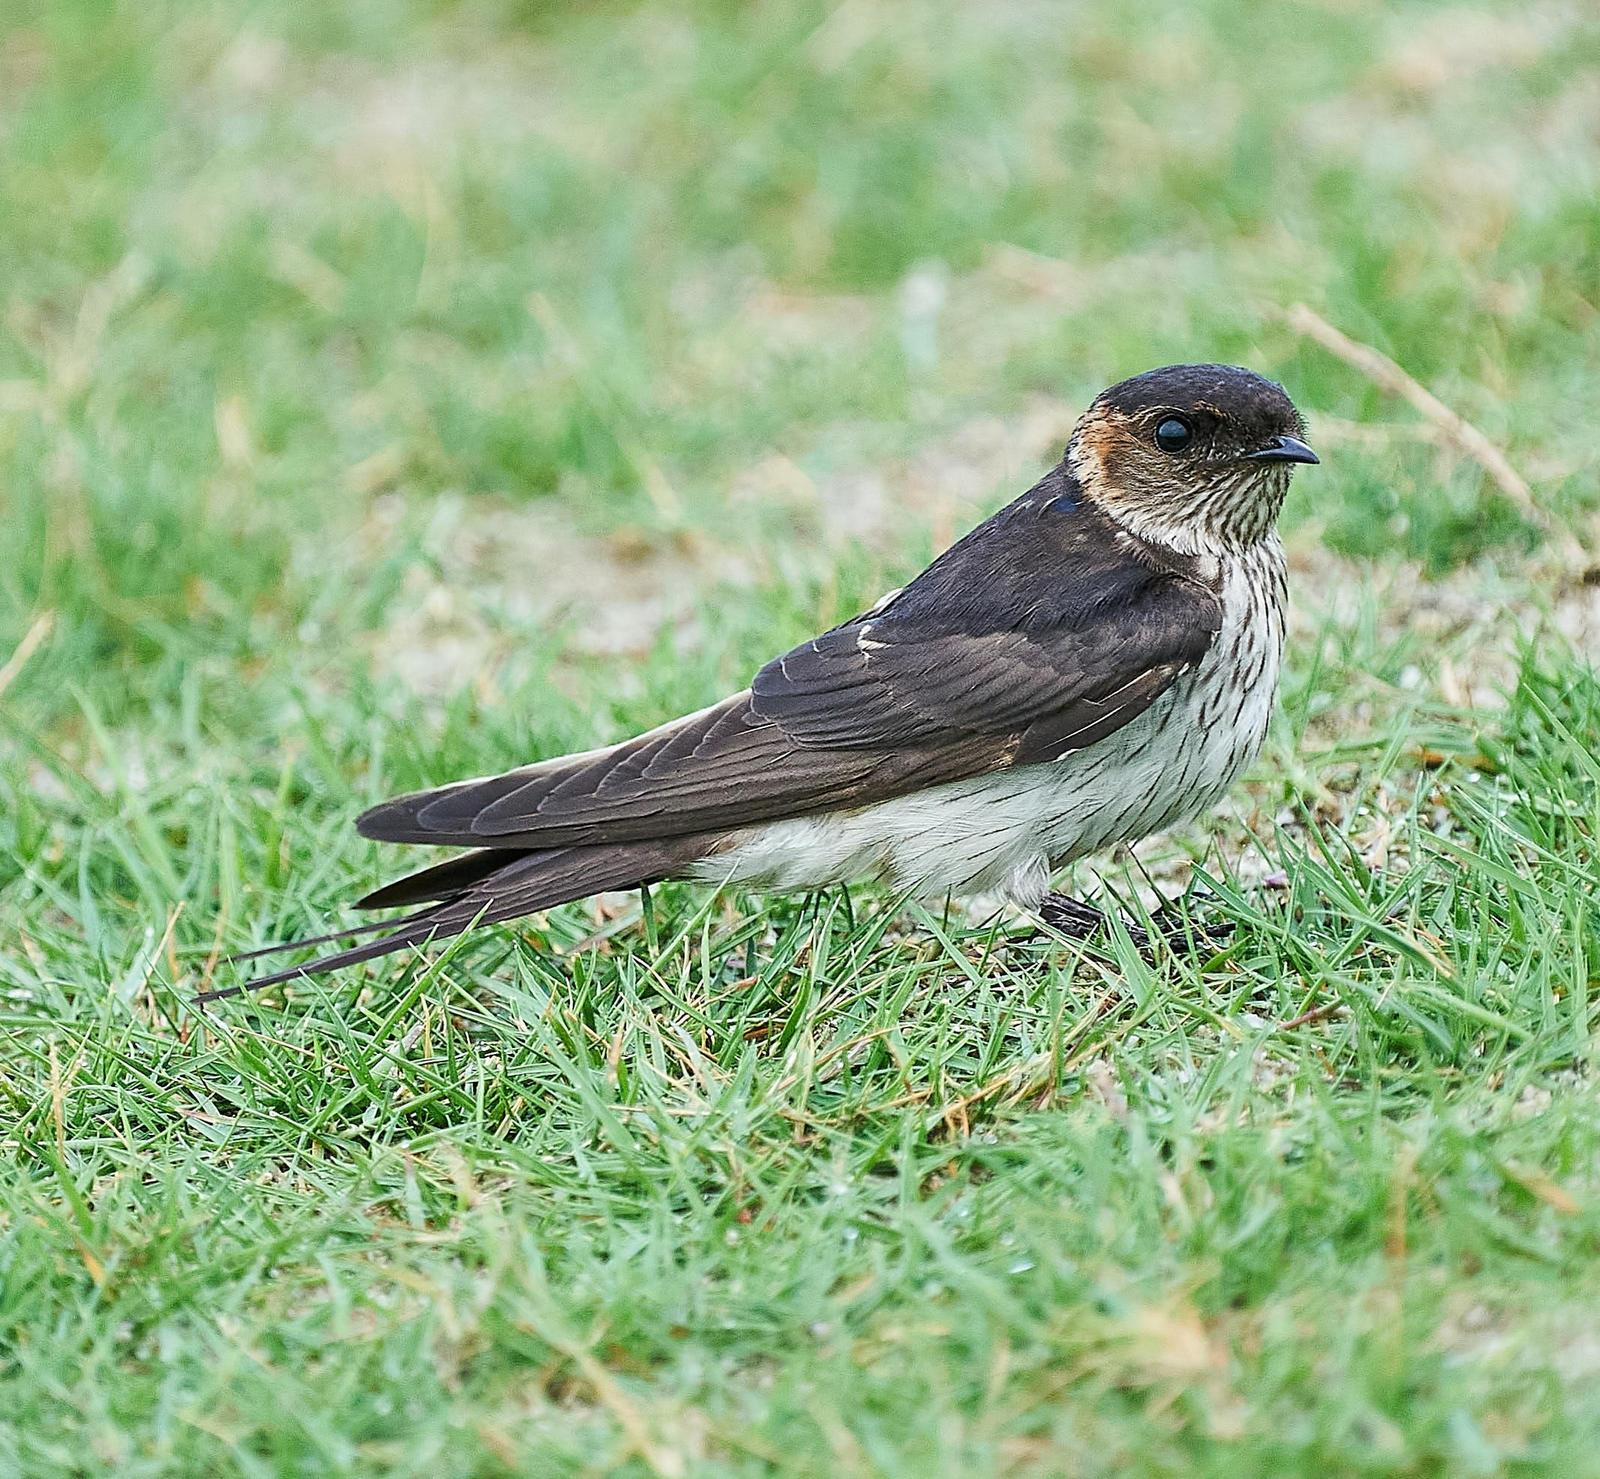 Red-rumped Swallow Photo by Steven Cheong